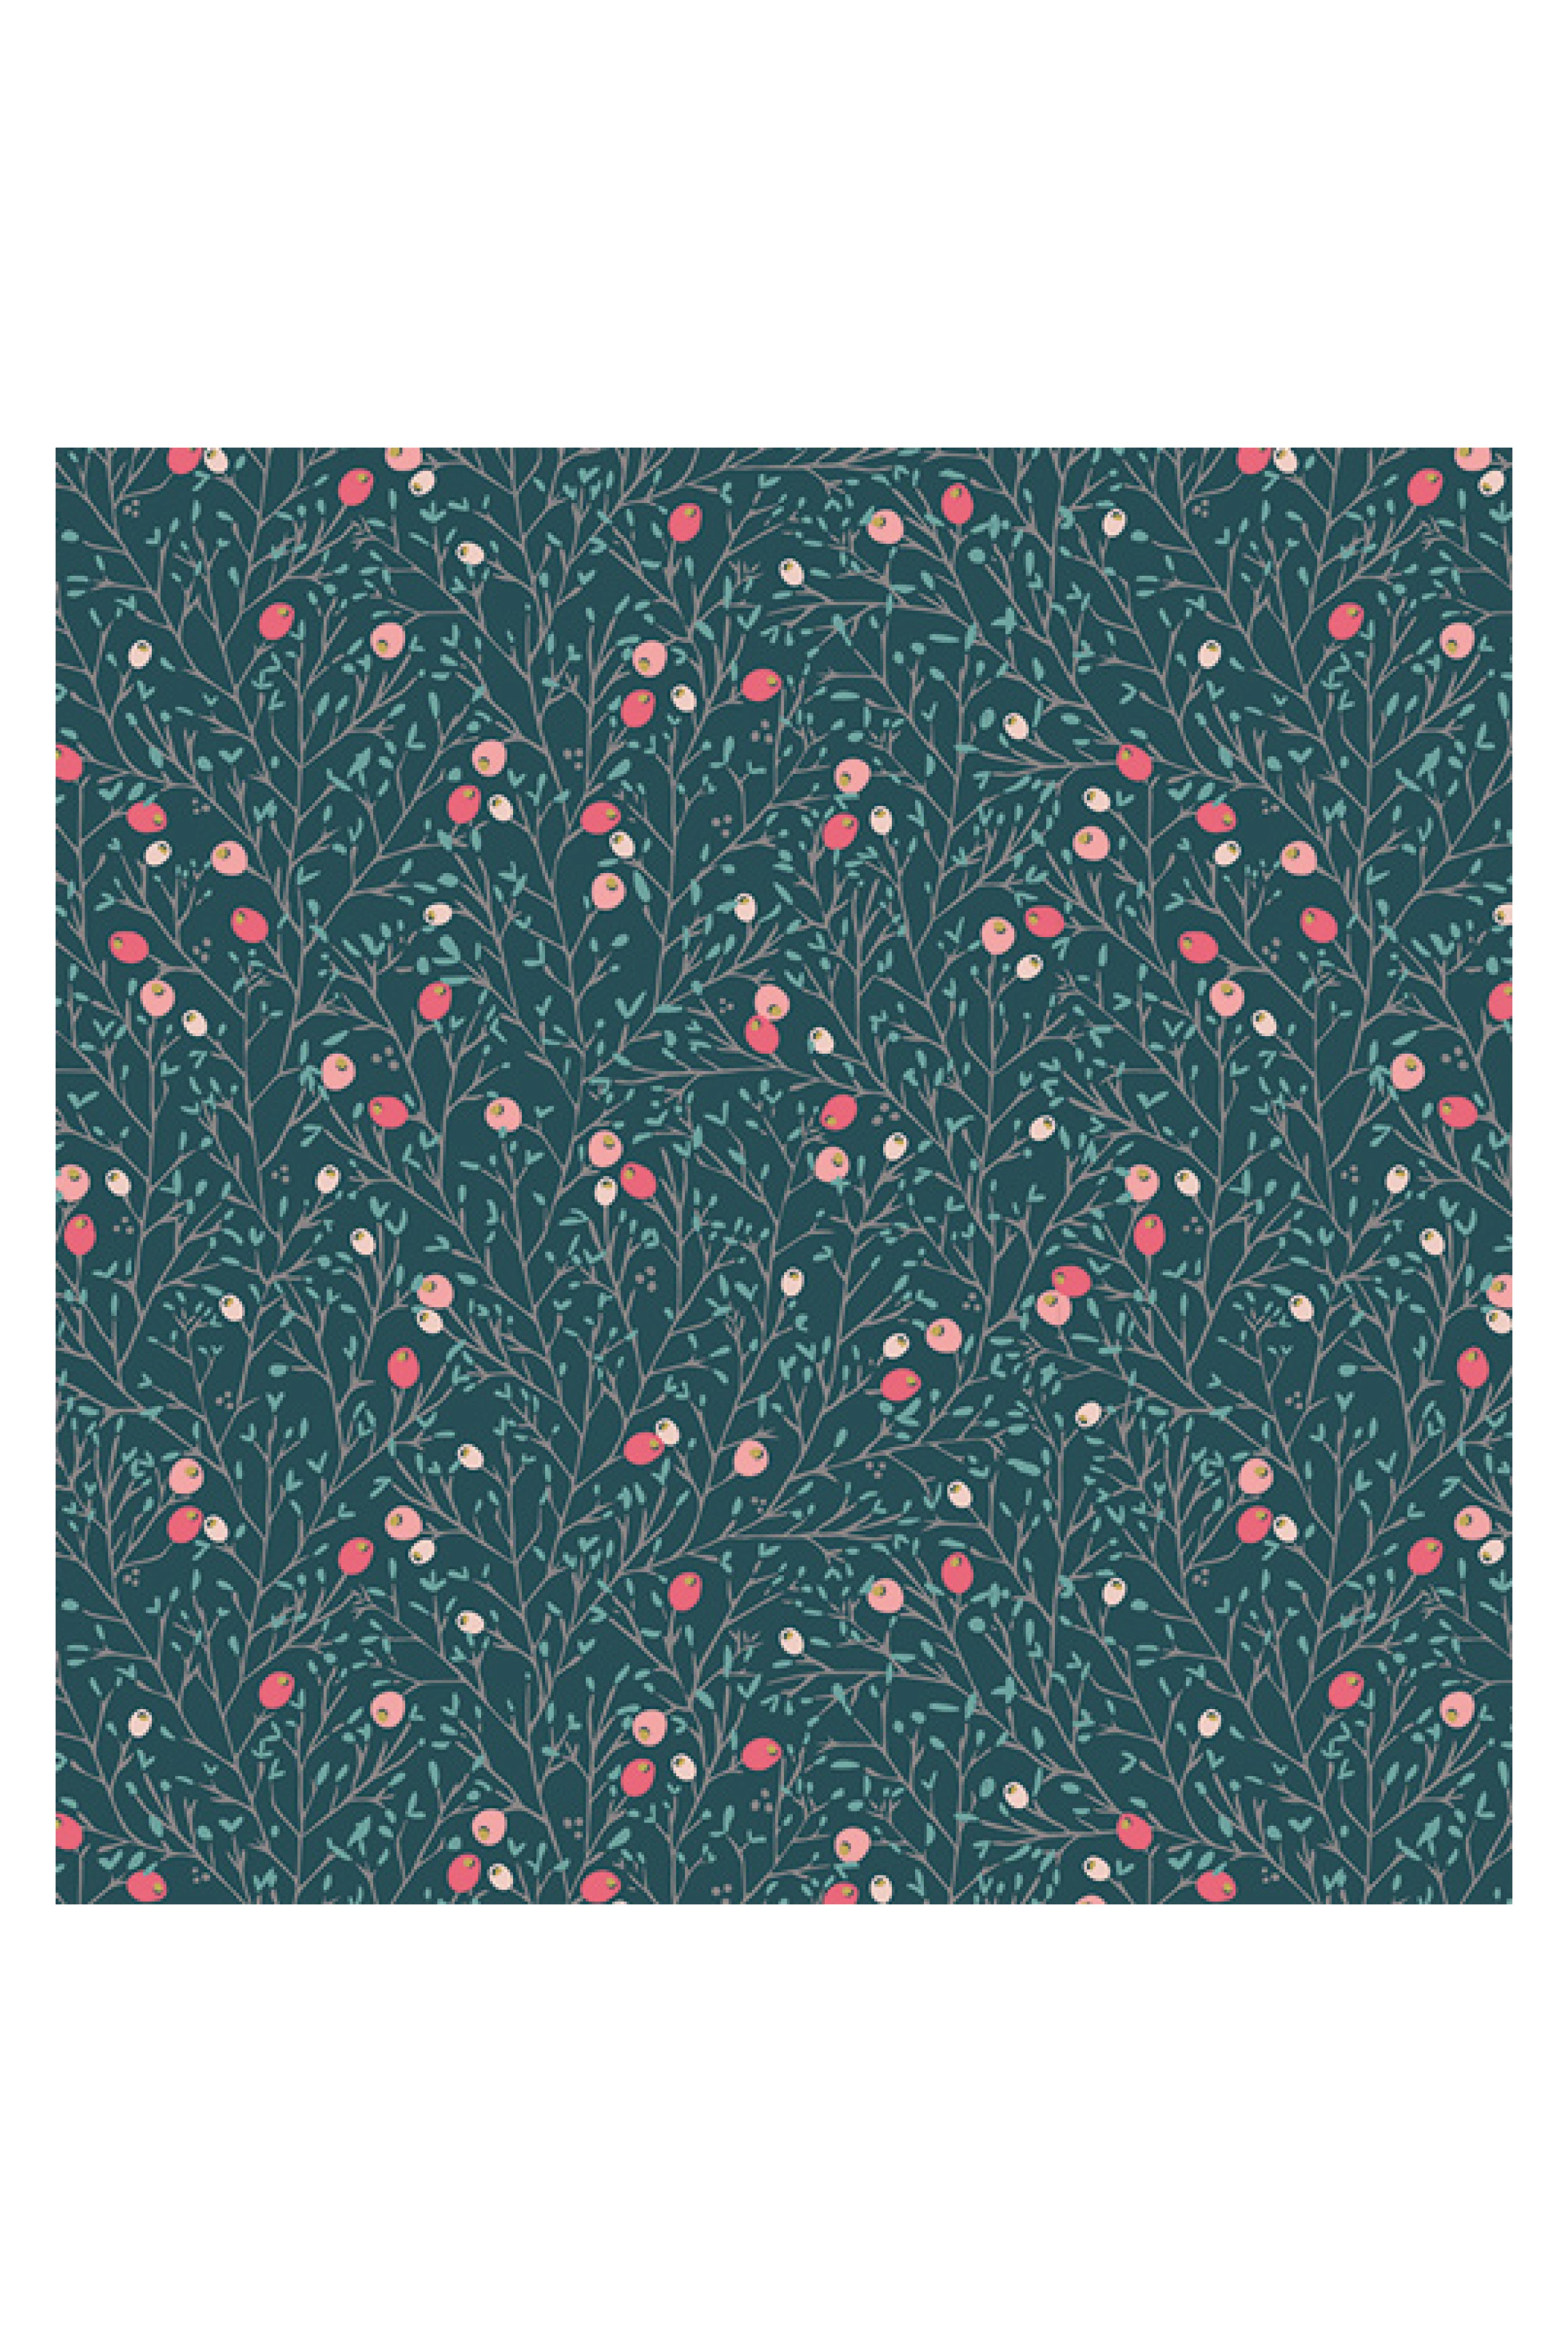 4.5 yards backing - Winterberry Spice